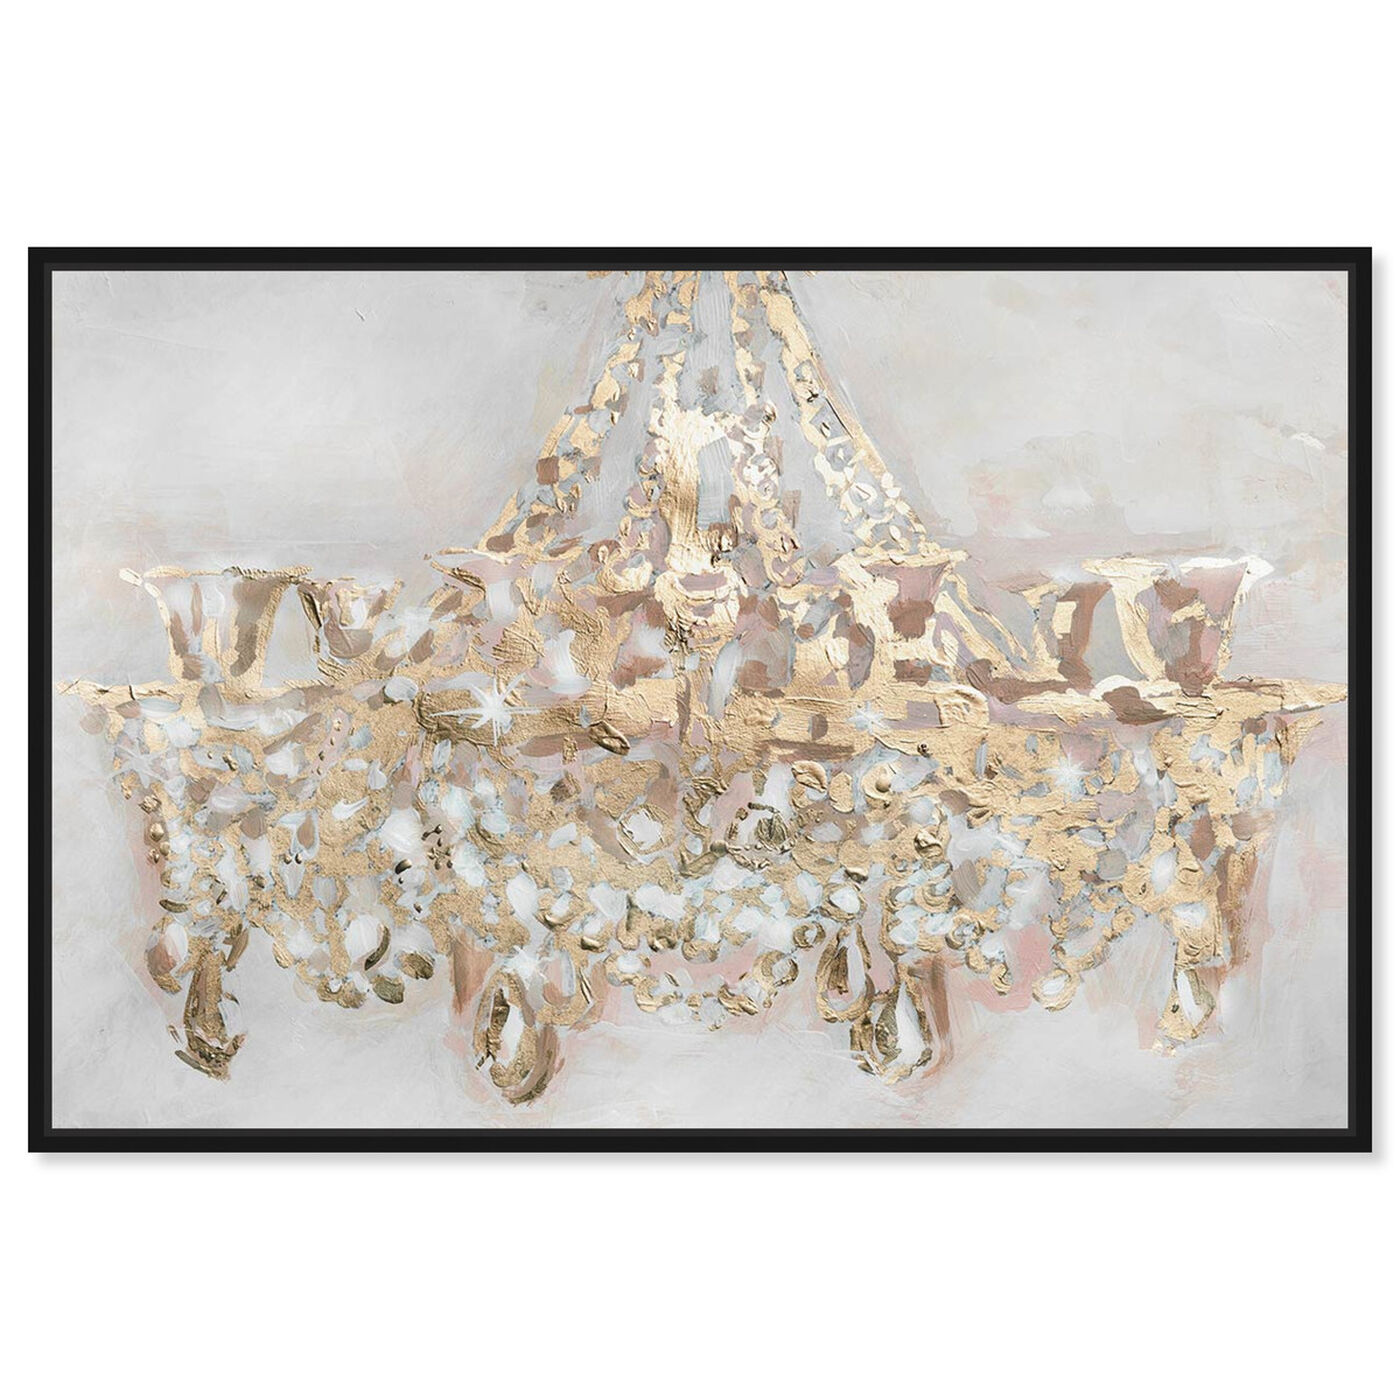 Oliver Gal Fashion and Glam Wall Art Framed Canvas Prints 'Candelabro' Chandeliers - Gold, White - 30 x 20